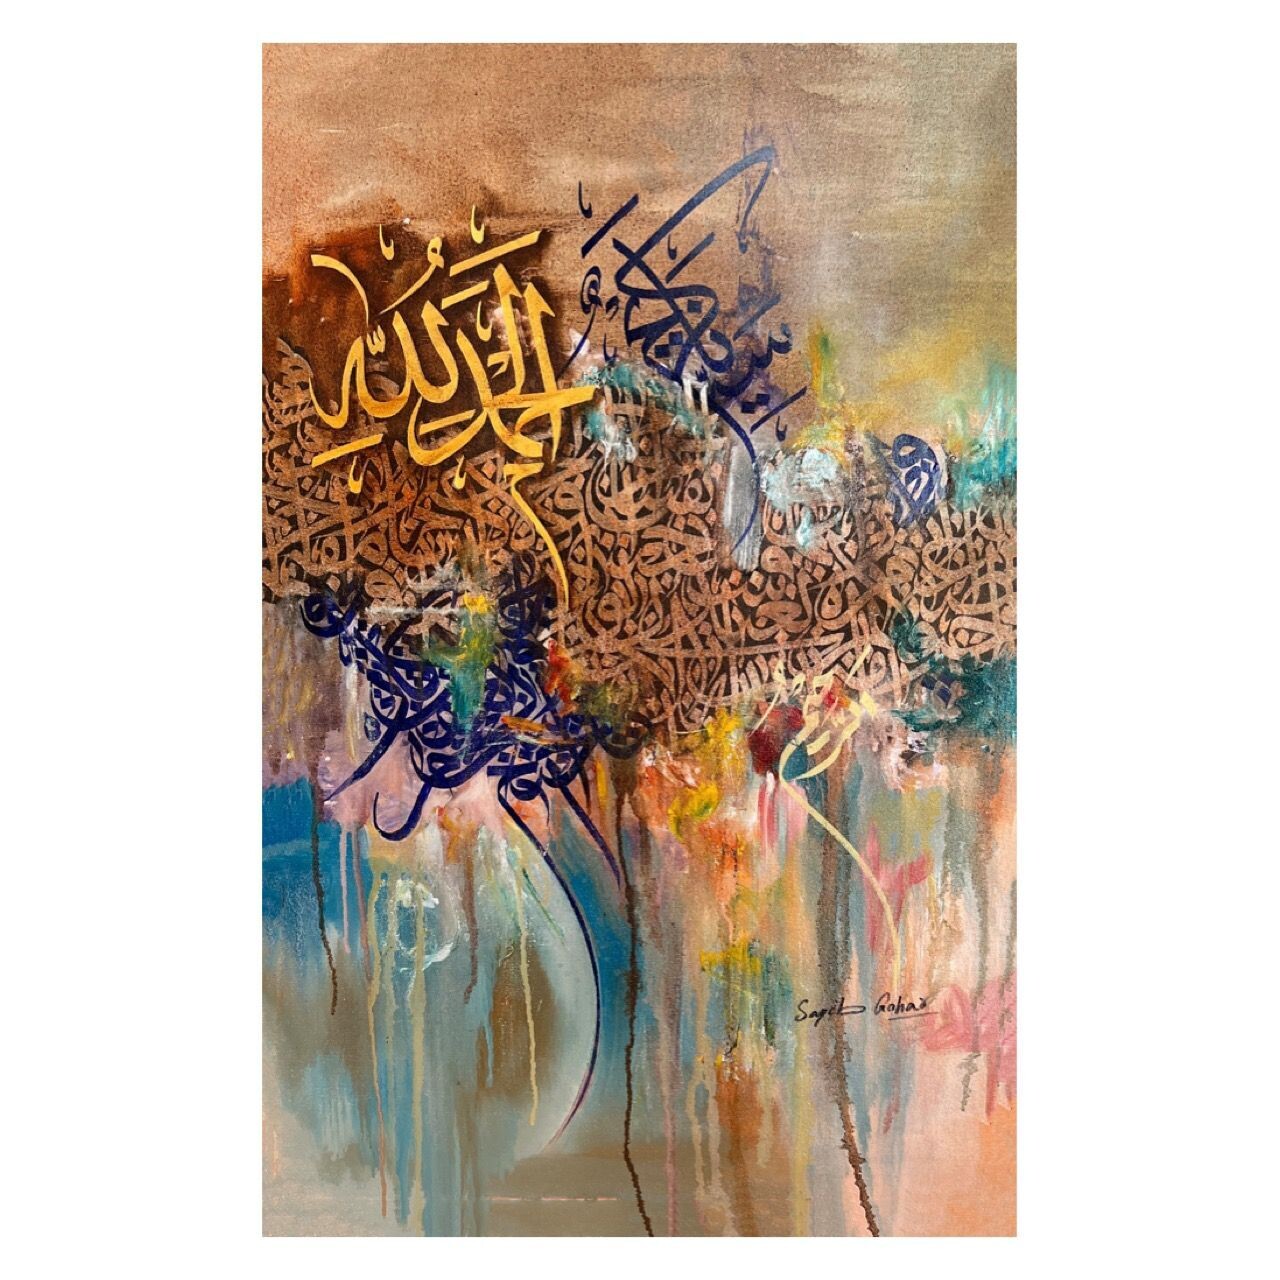 Alhamdulillah Praise be to Allah - abstract calligraphy oil painting